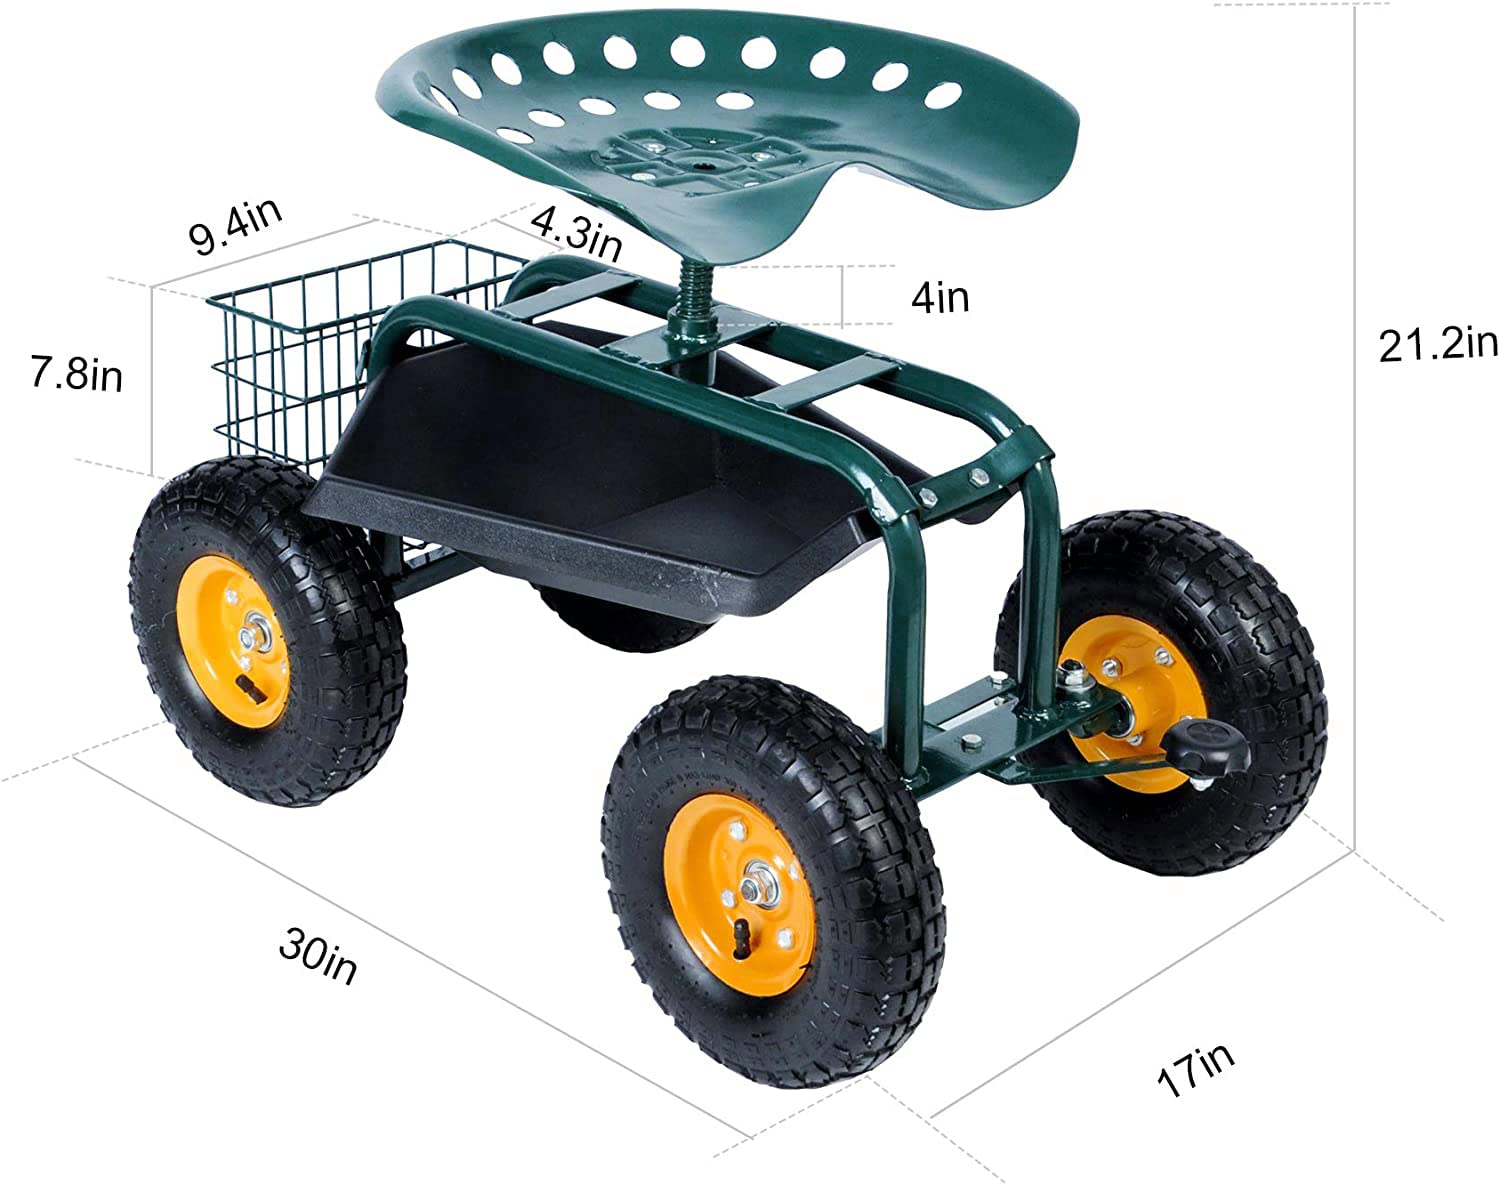 Rolling Garden Cart with Seat Lawn Yard Patio Work Seat Gardening Stool Cart with Tool Tray and Storage Basket